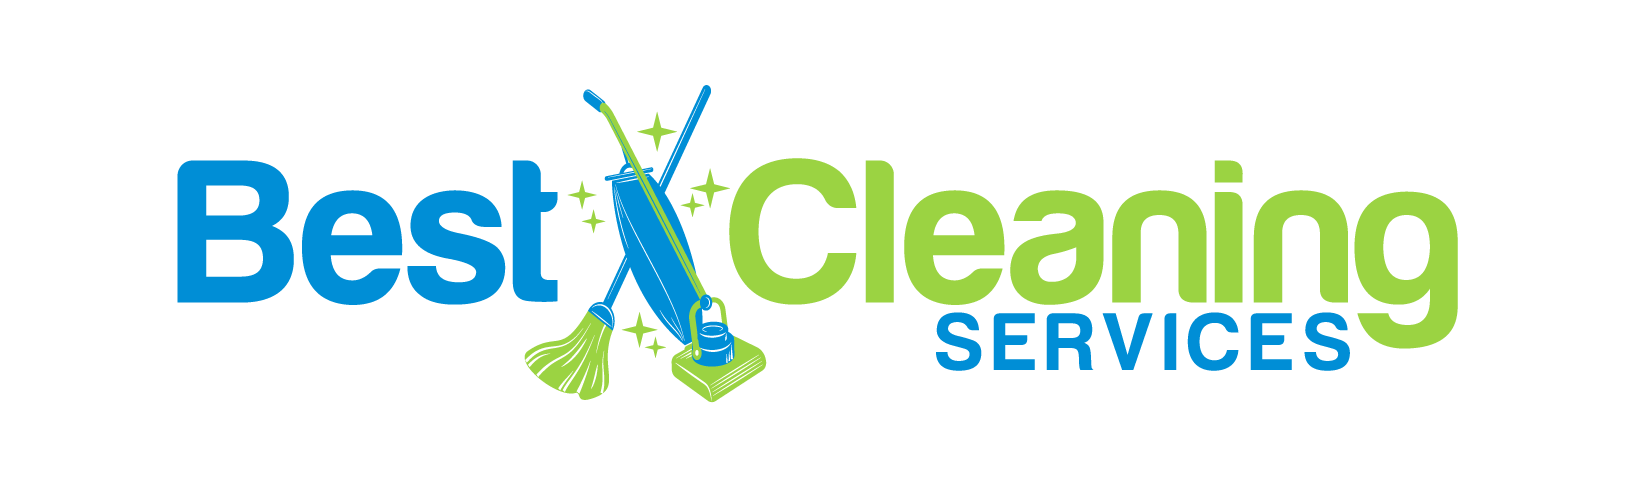 Best Cleanng Services Keene NH